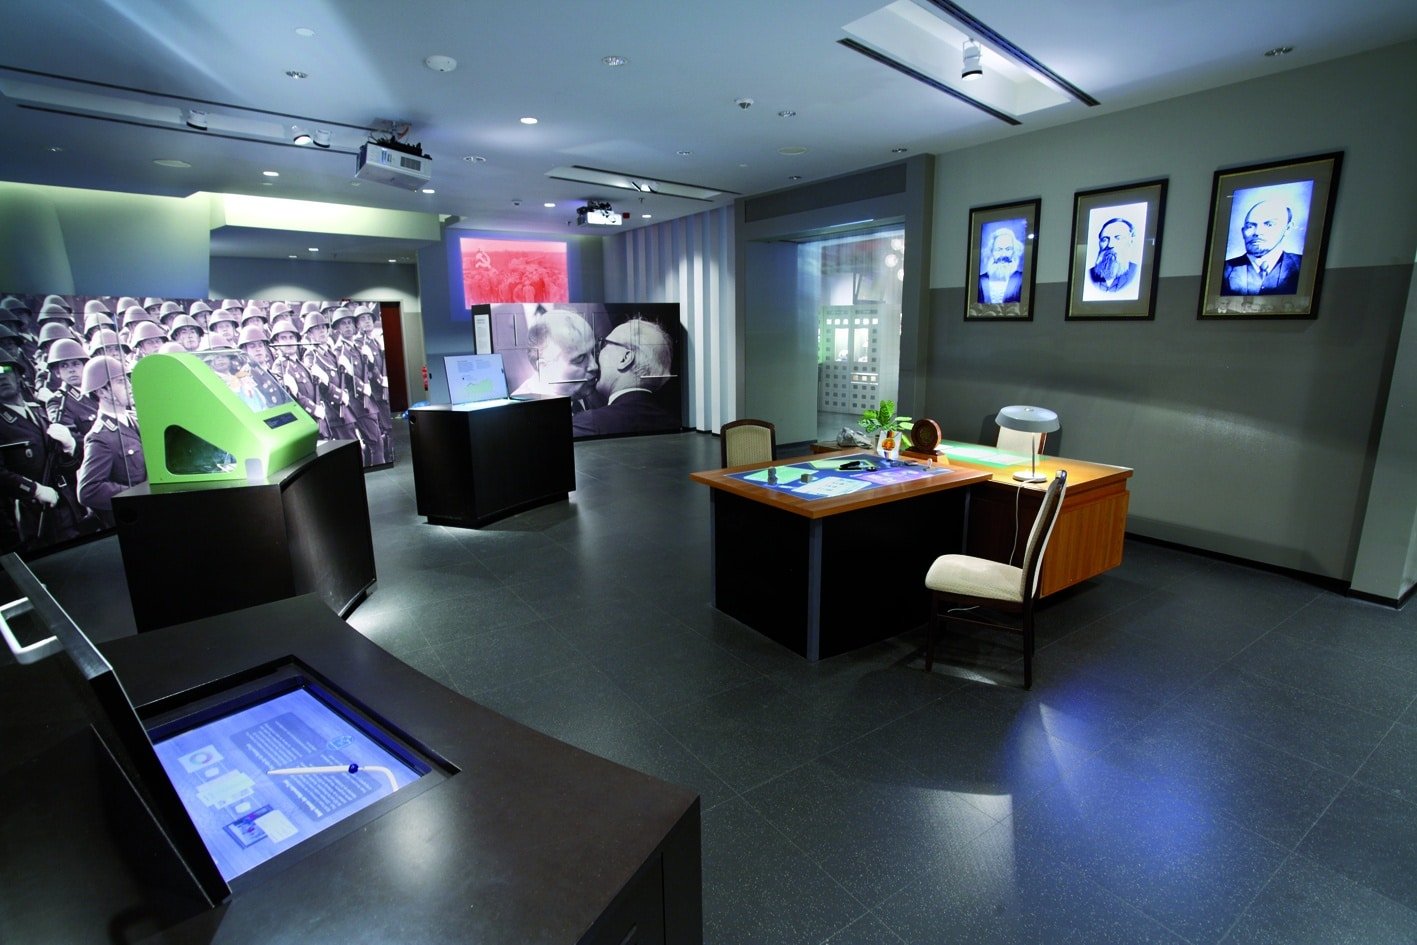 ddr museum